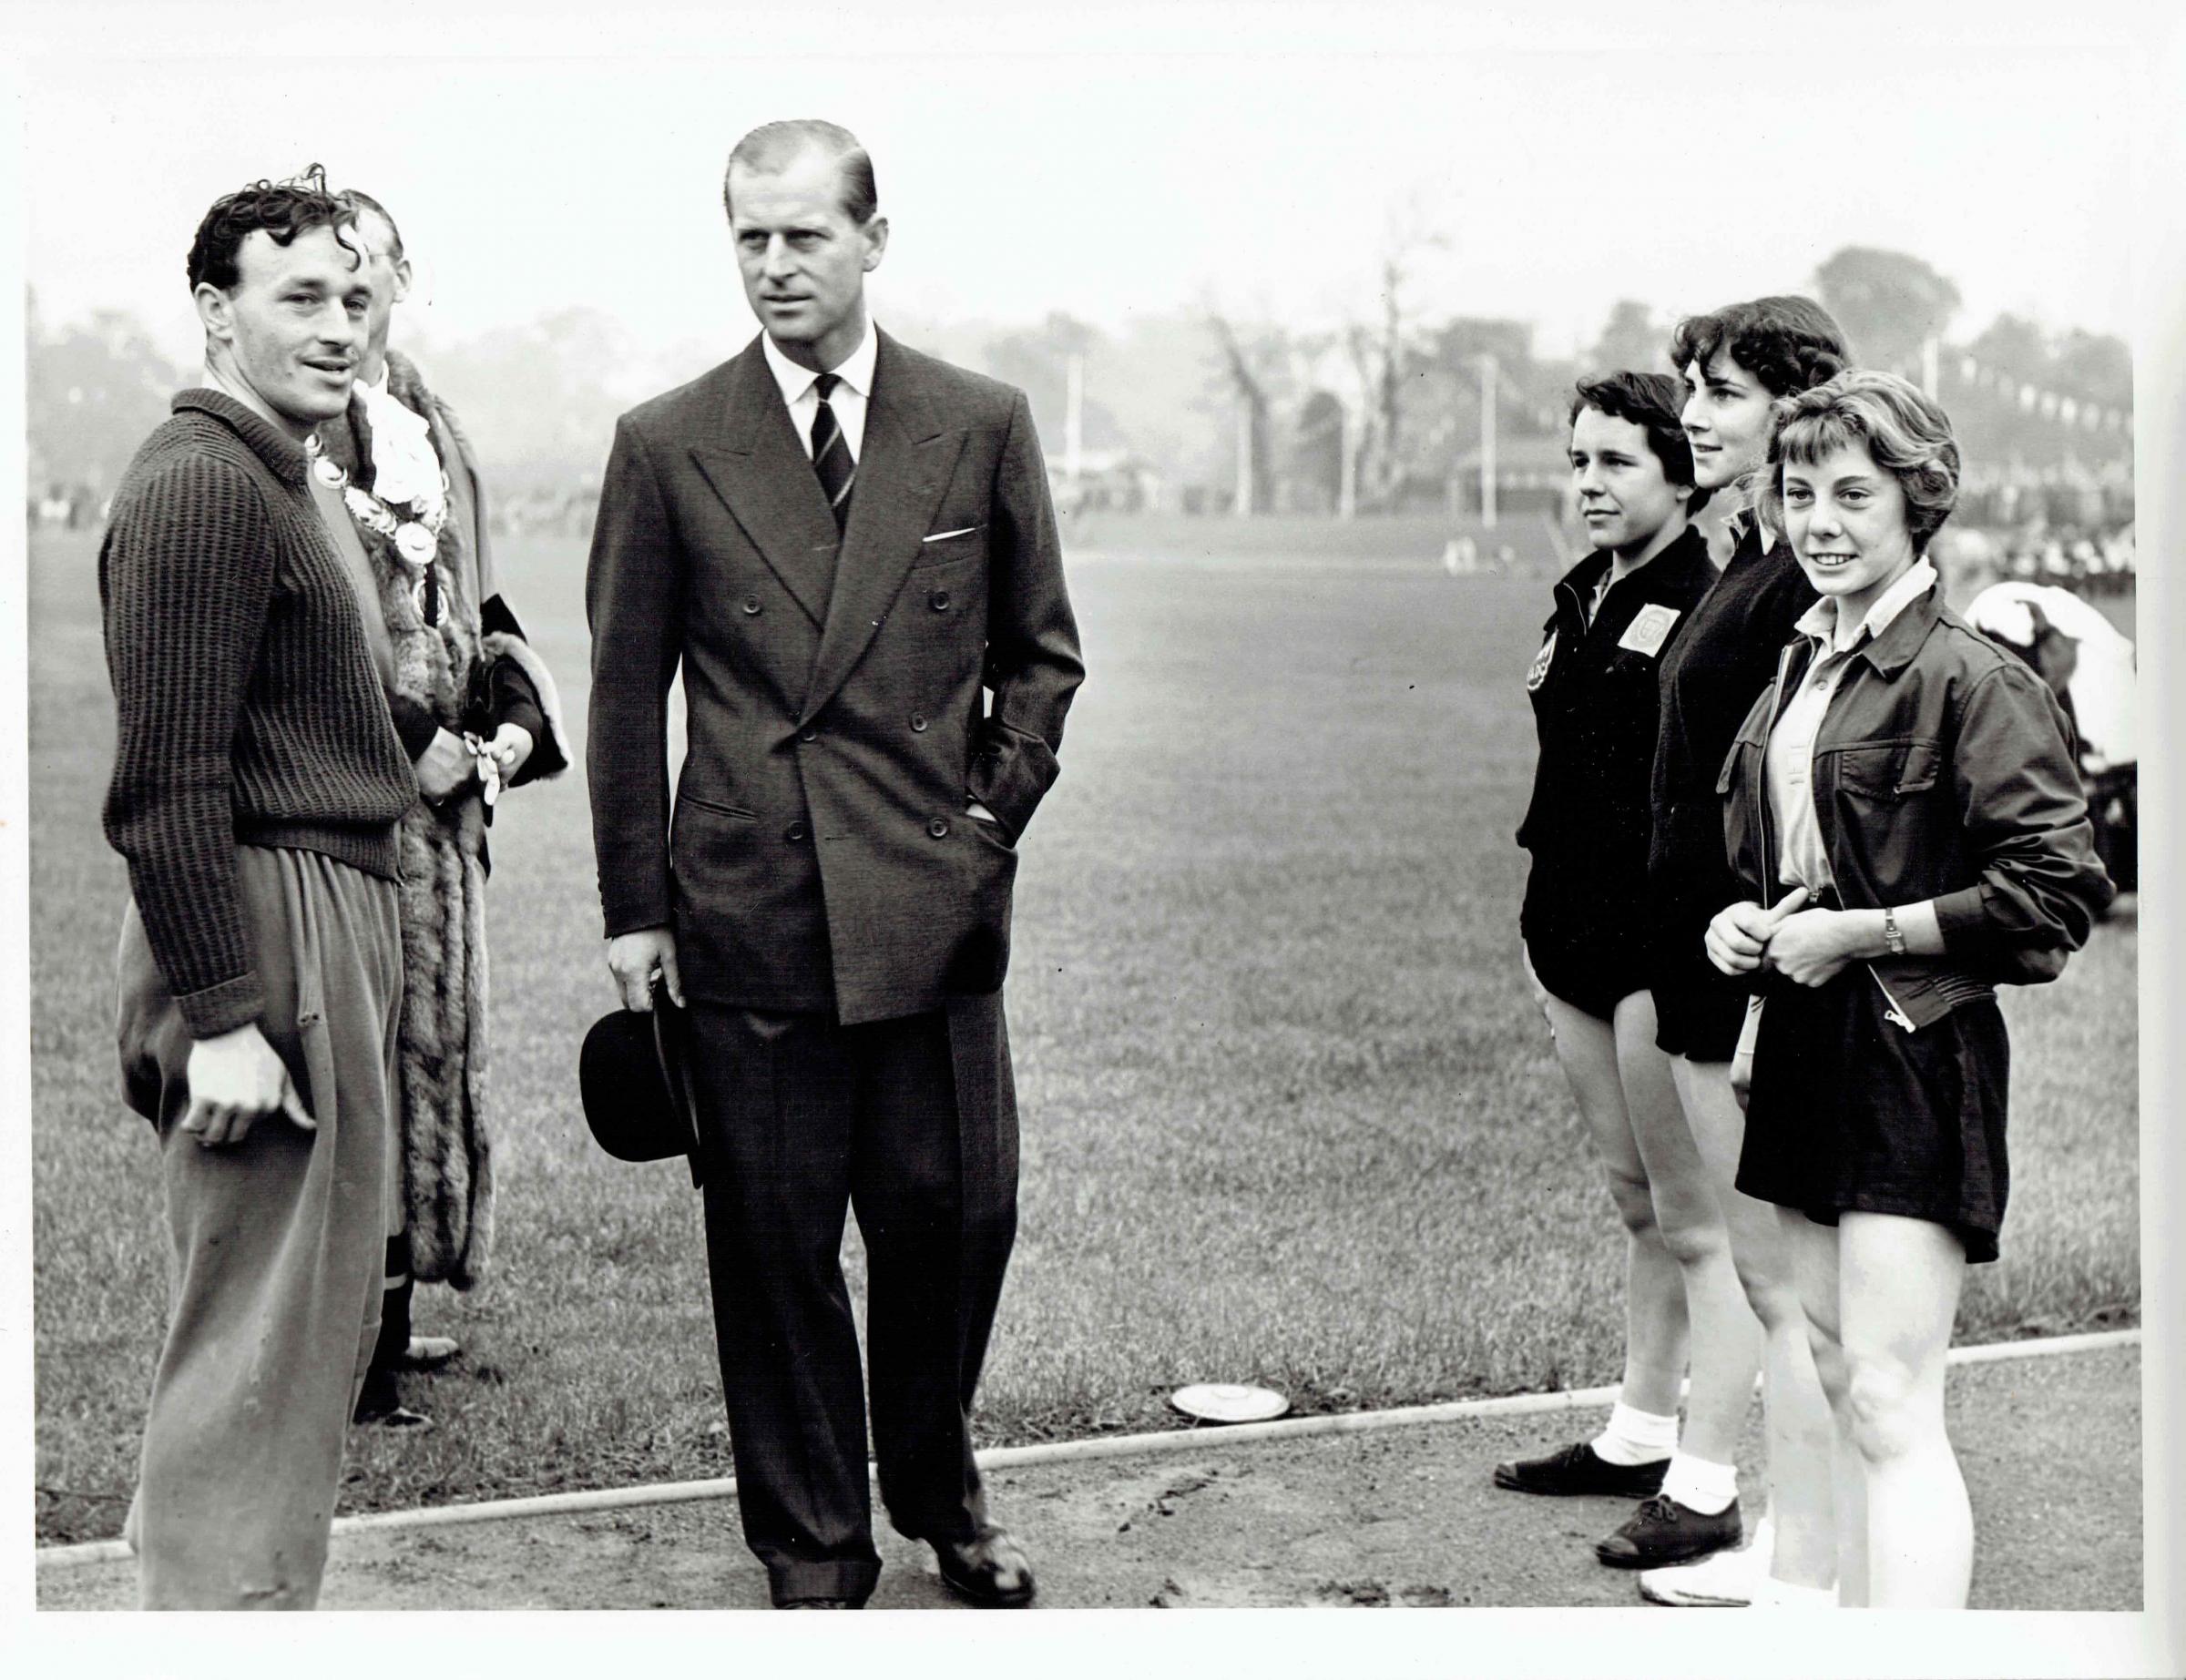 The Duke of Edinburgh at Woodside Playing Fields for the official opening in 1955. Credit: Watford Musuem